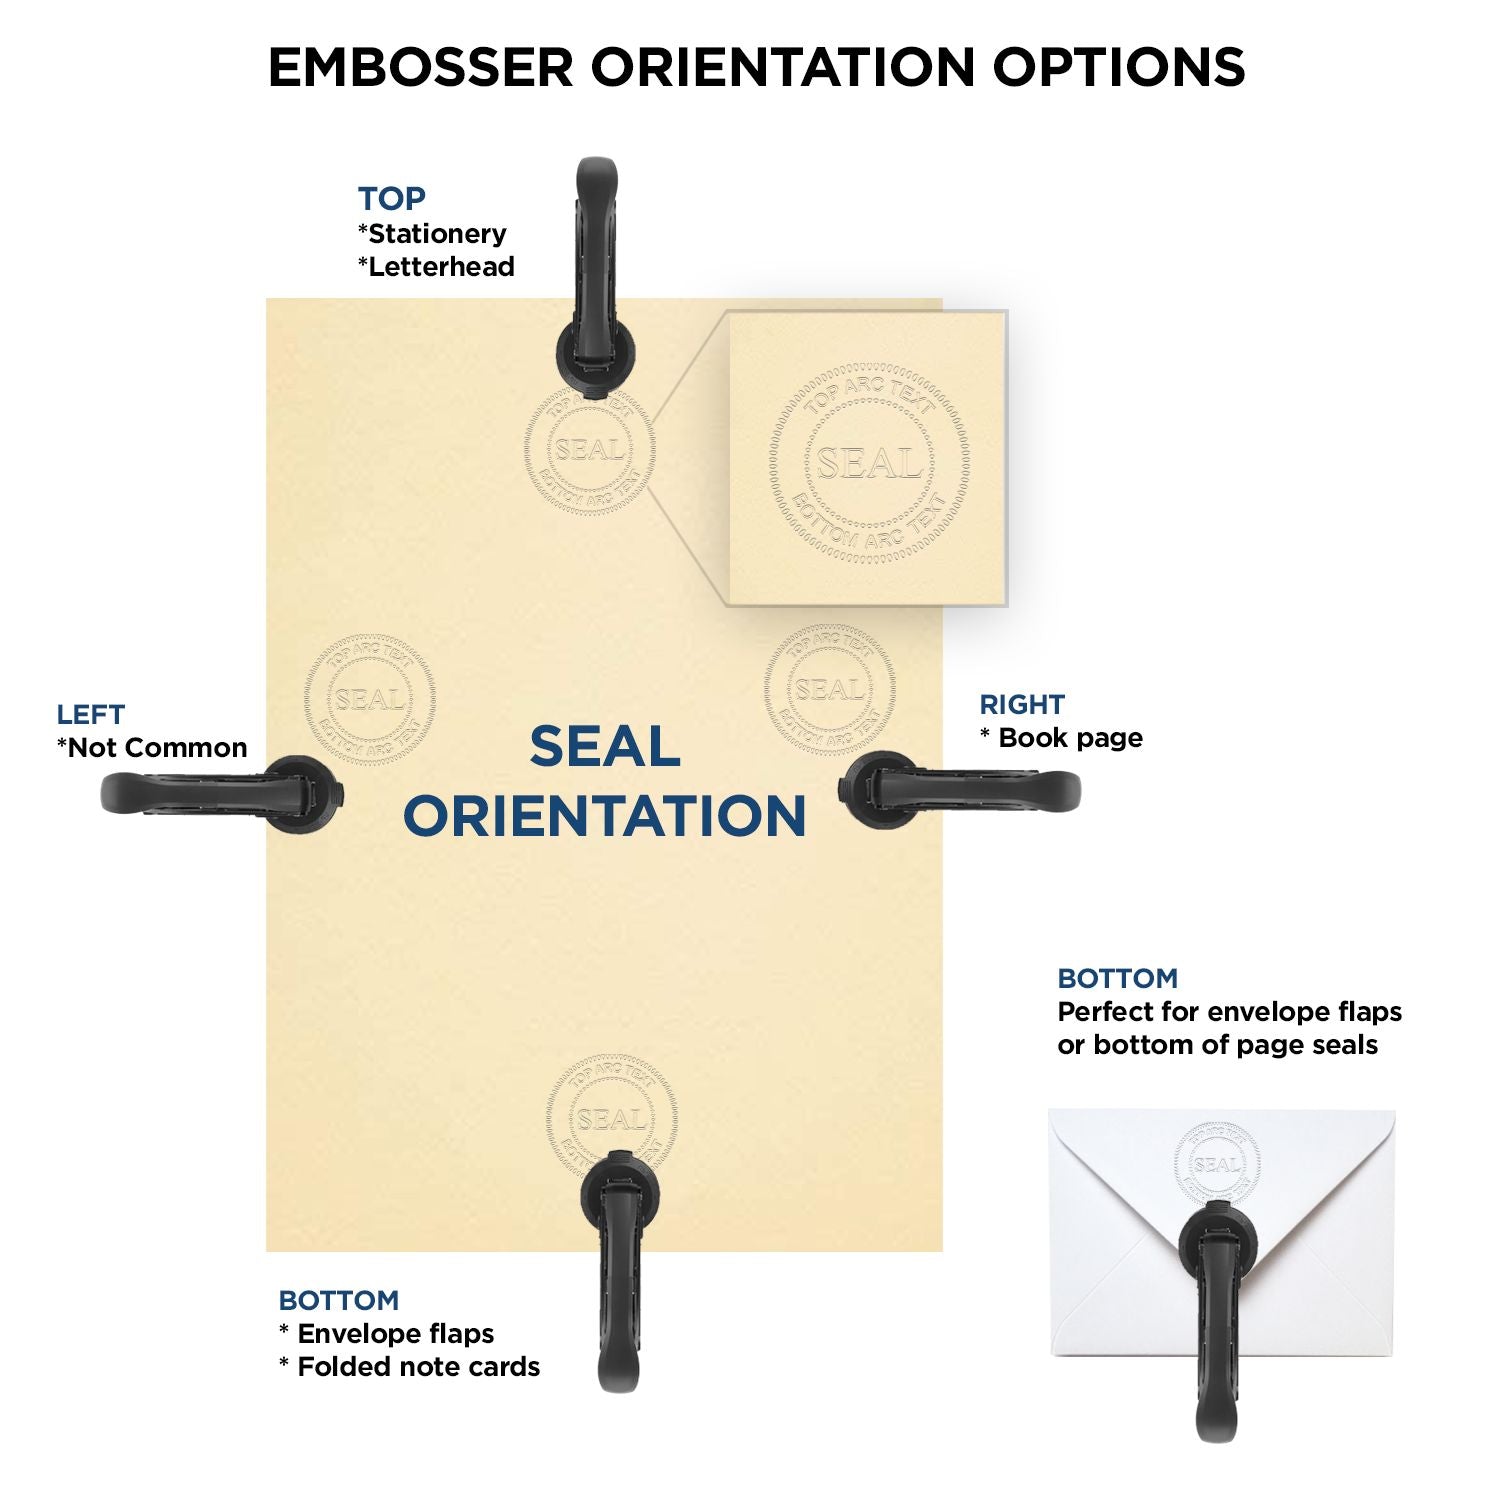 An infographic for the Handheld Wisconsin Professional Engineer Embosser showing embosser orientation, this is showing examples of a top, bottom, right and left insert.